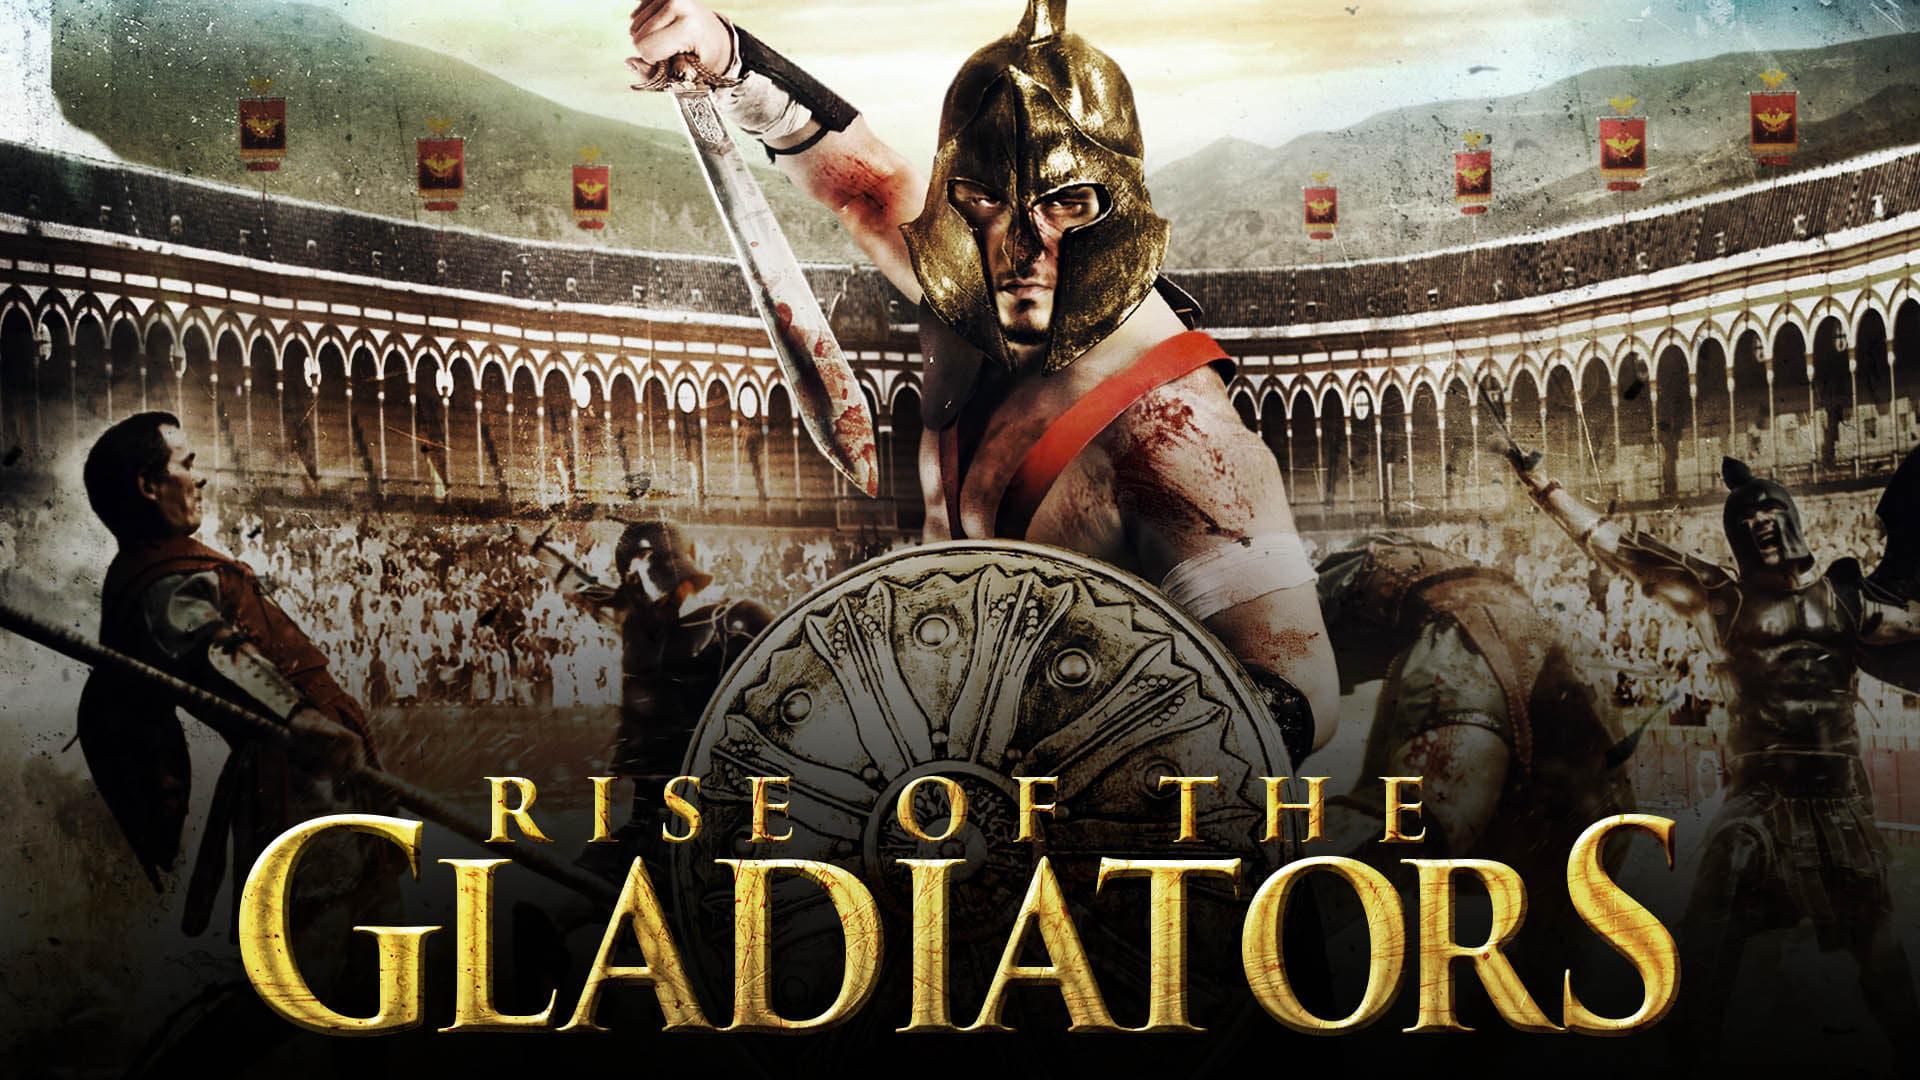 Rise of the Gladiators backdrop